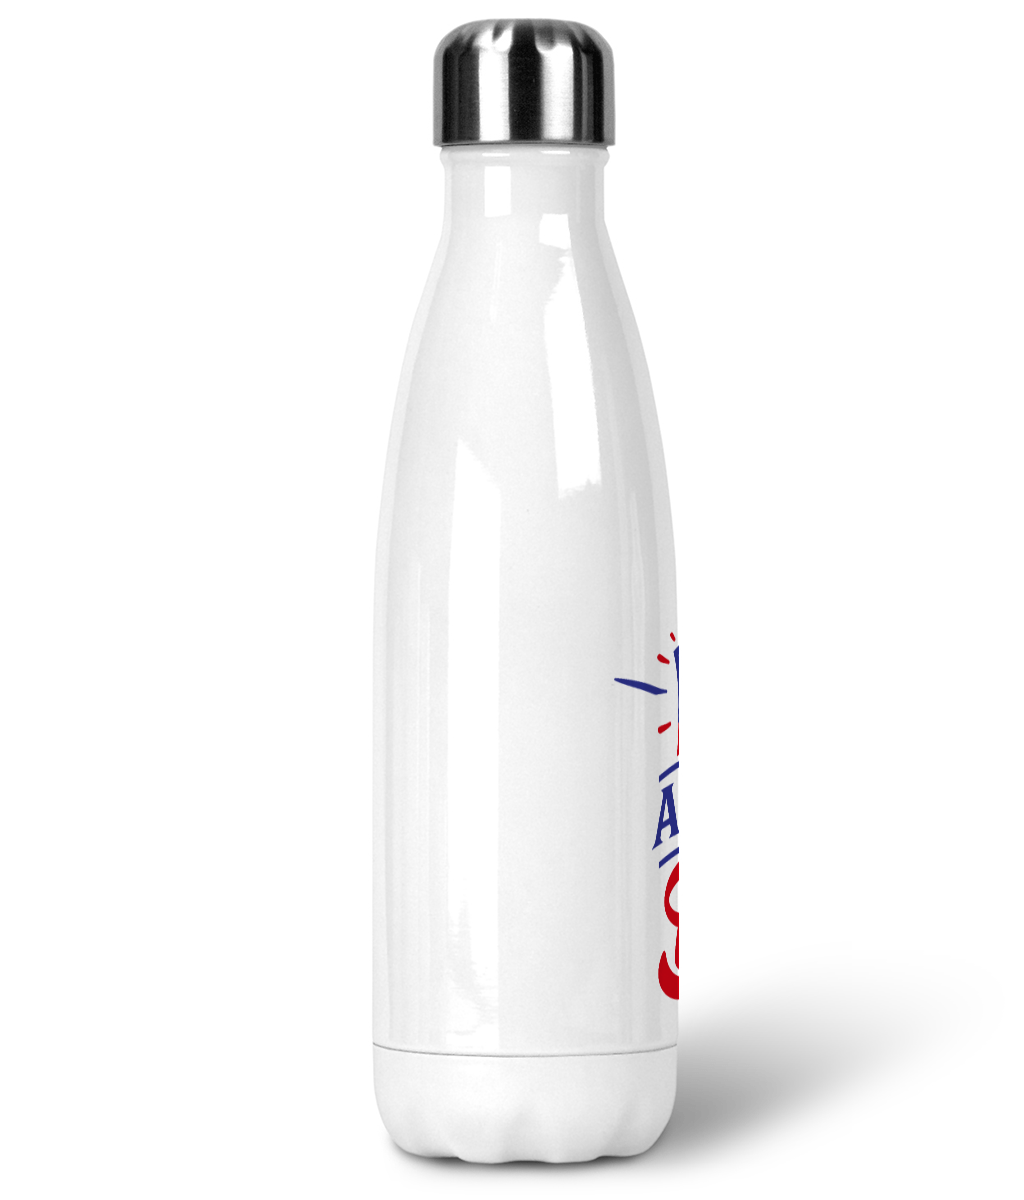 Stainless Steel Water Bottle All American dad